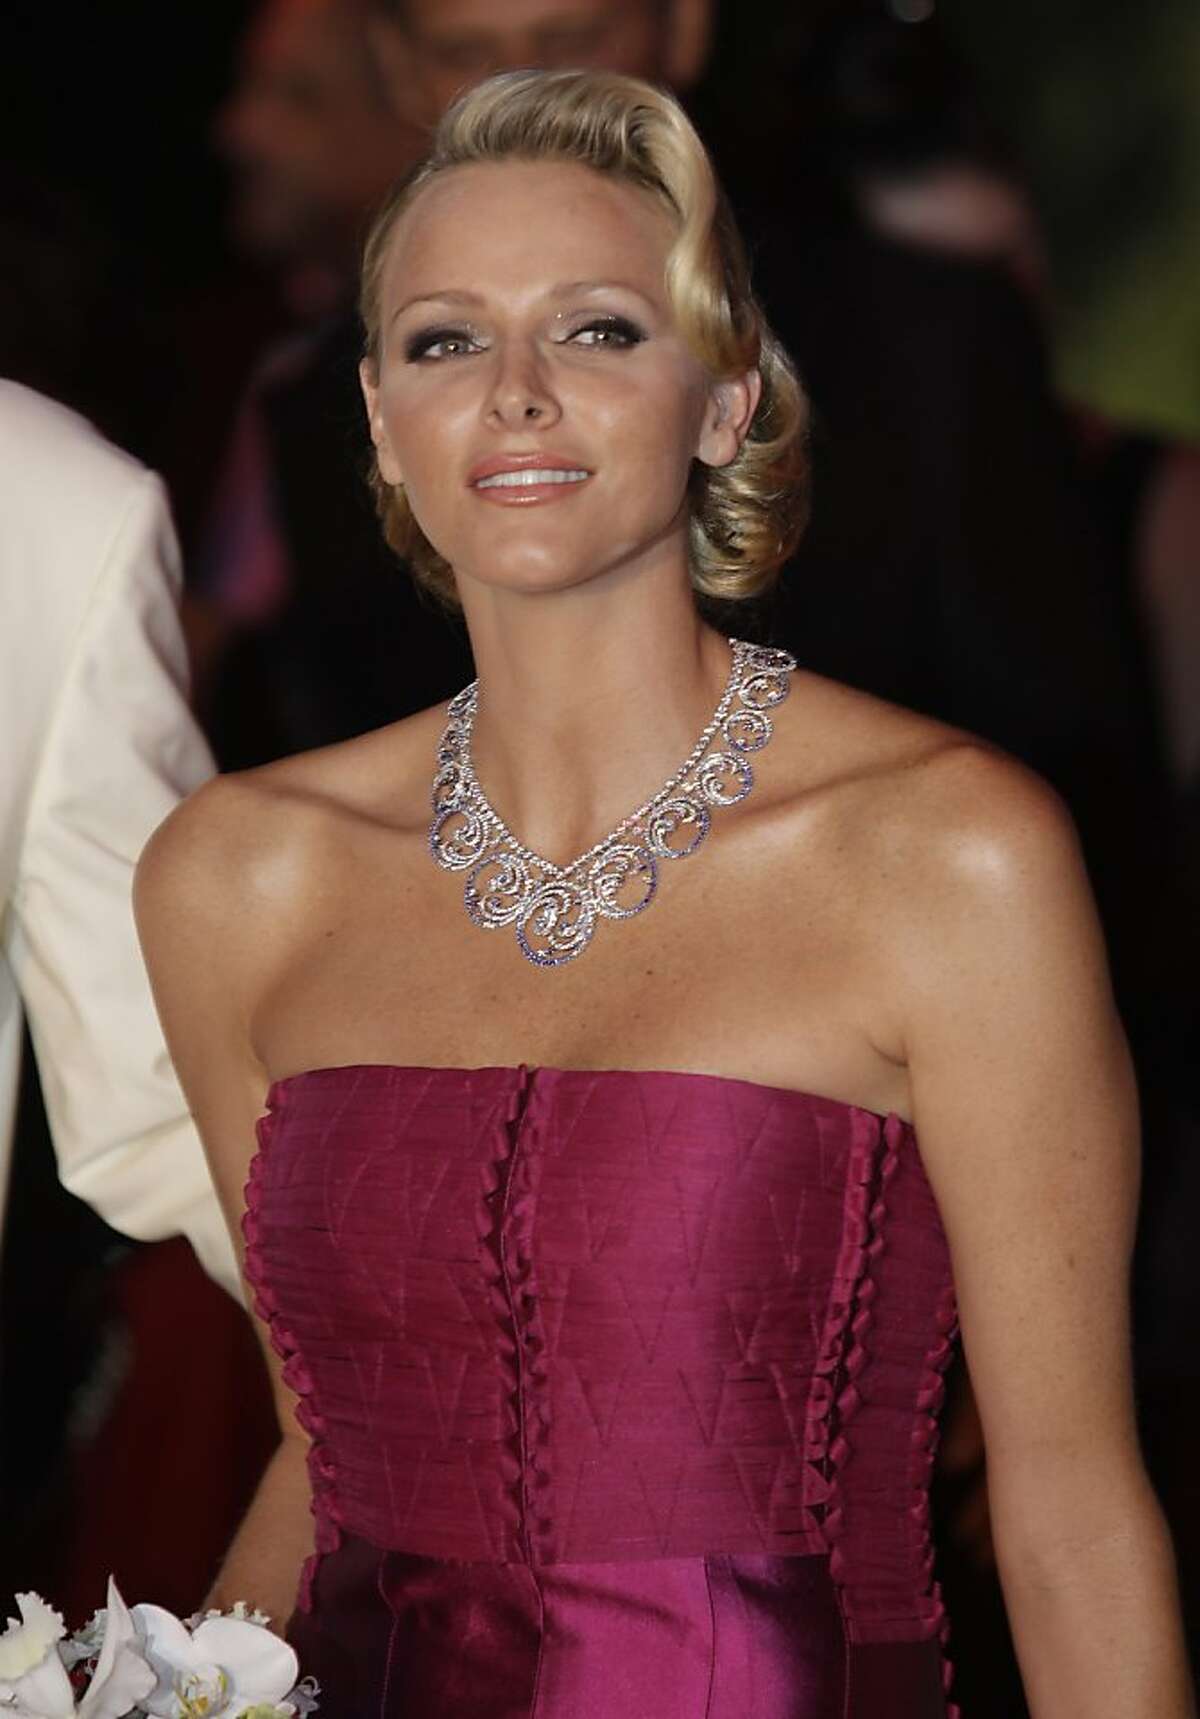 Prince Albert II of Monaco's wife Princess Charlene takes part to the "Red Cross Gala", Friday, Aug. 5, 2011, in Monaco. (AP Photo/Lionel Cironneau)